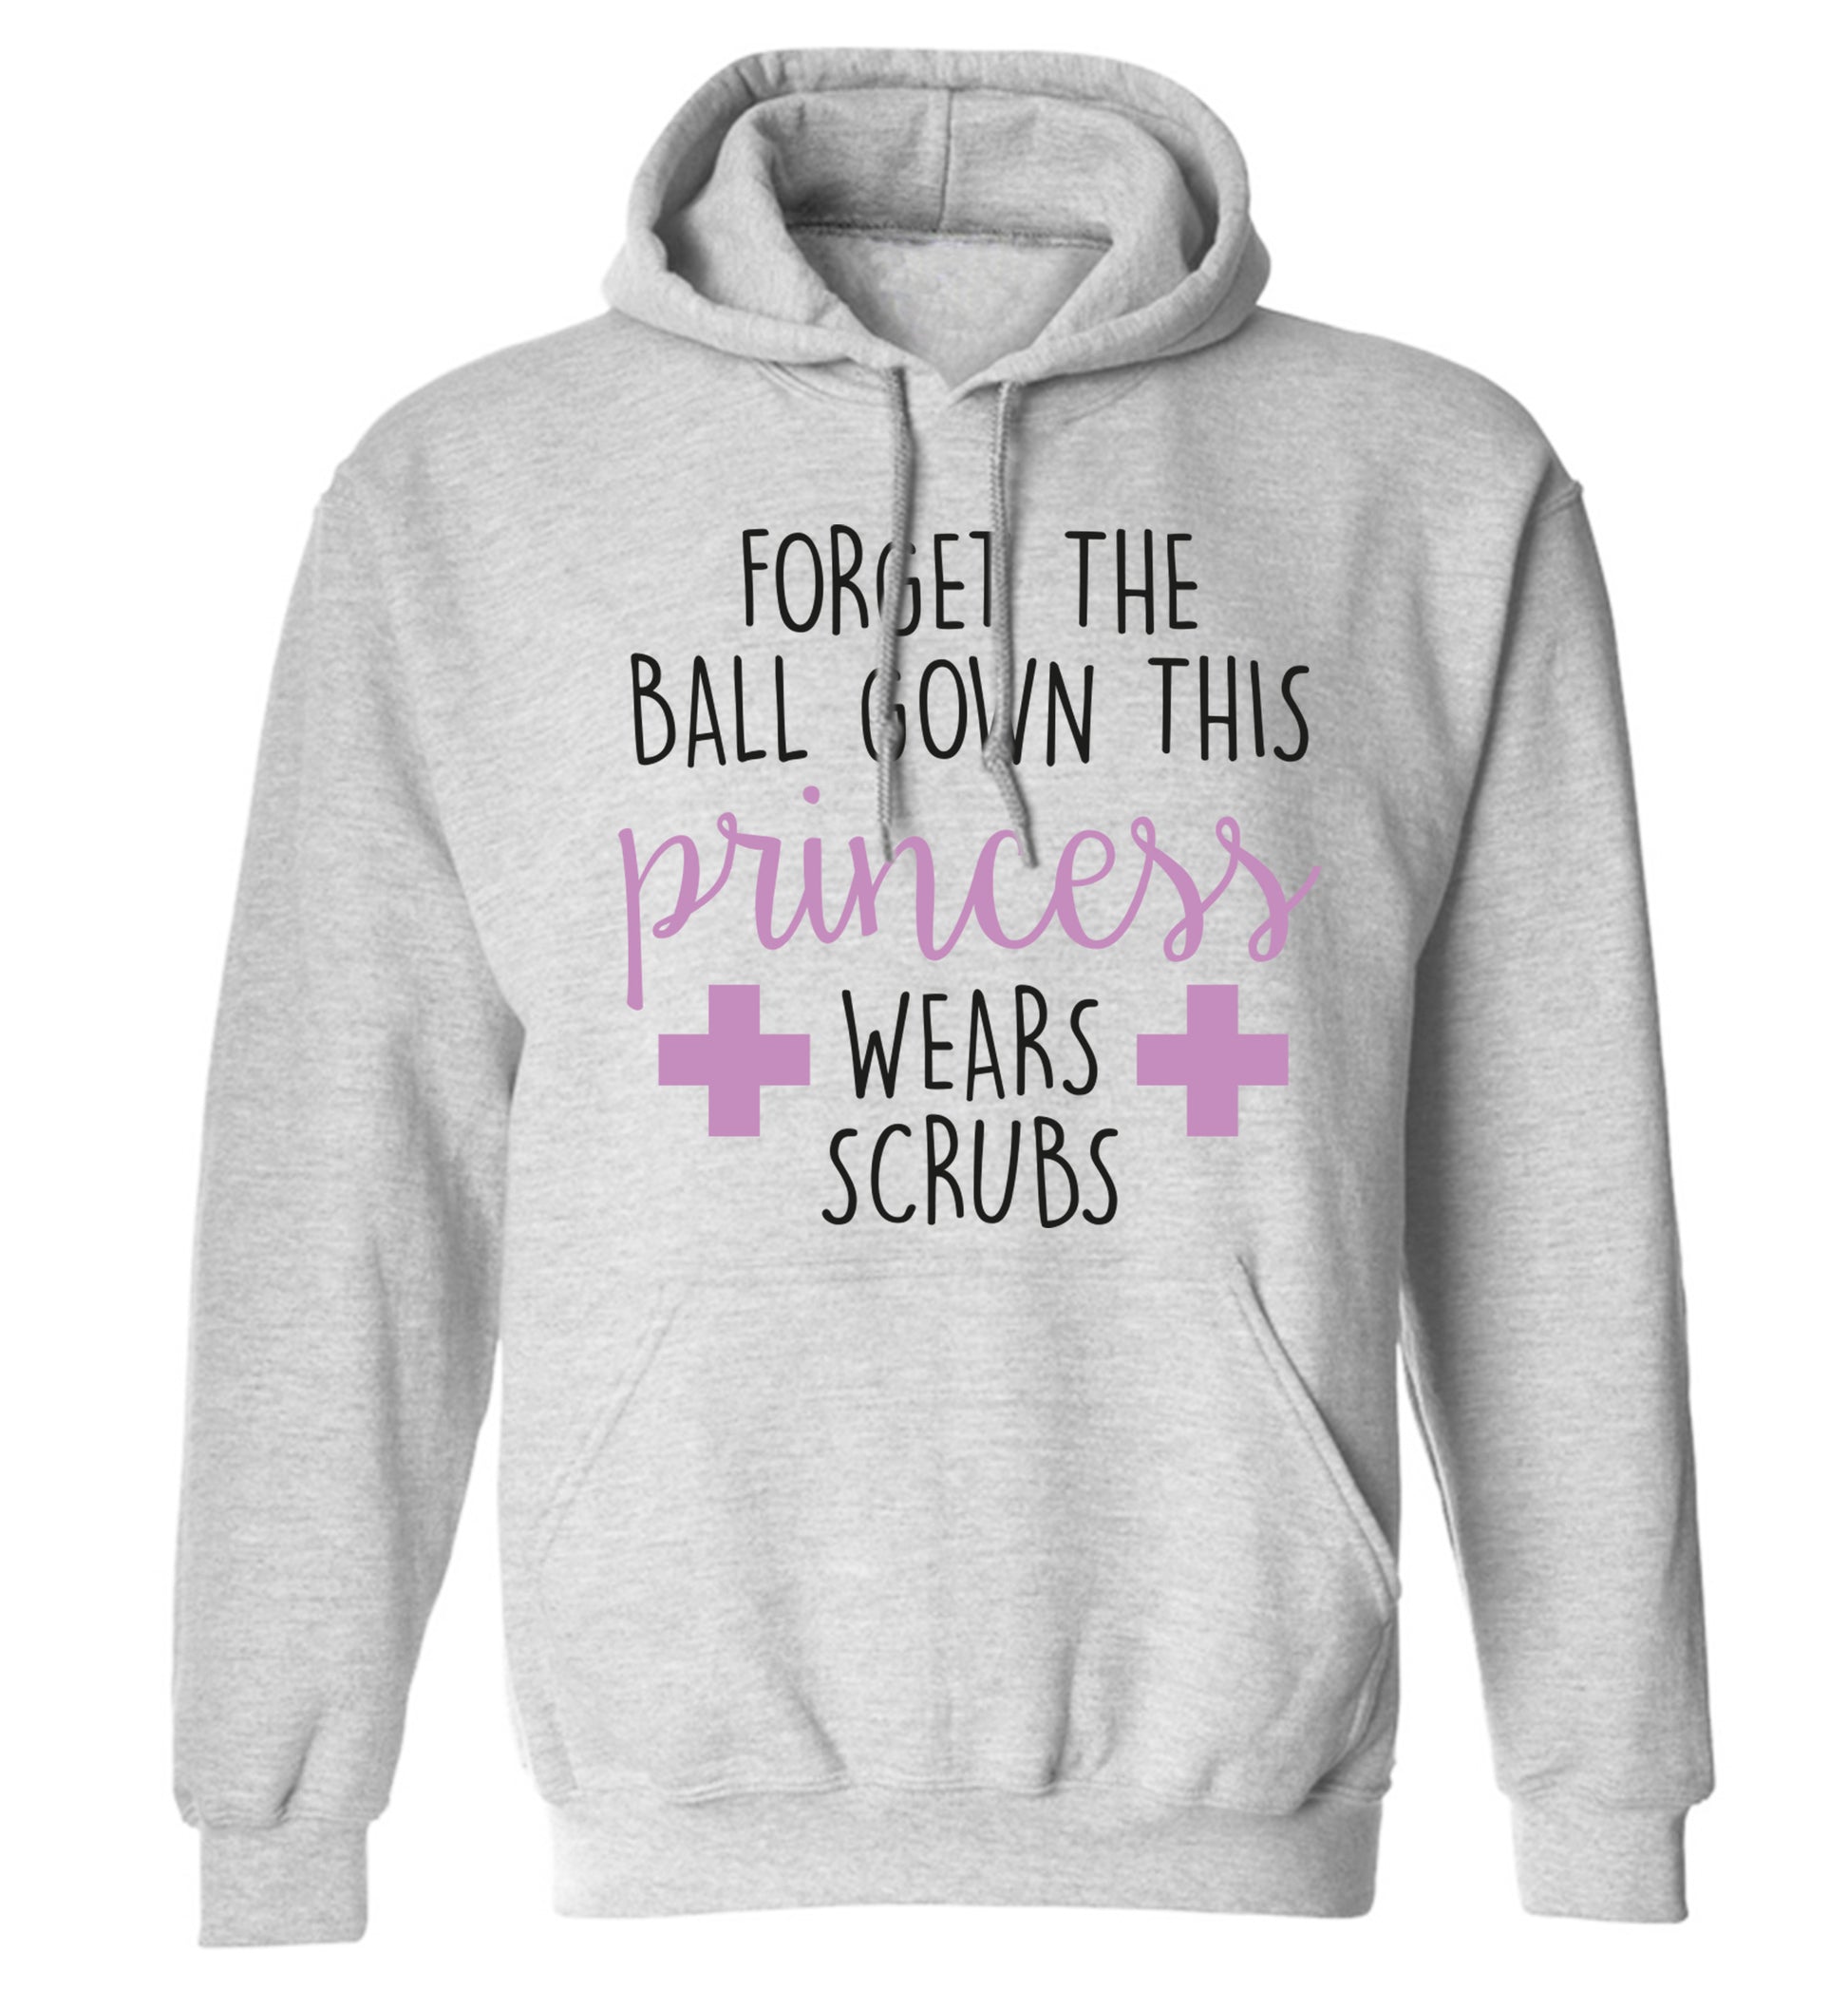 Forget the ball gown this princess wears scrubs adults unisex grey hoodie 2XL